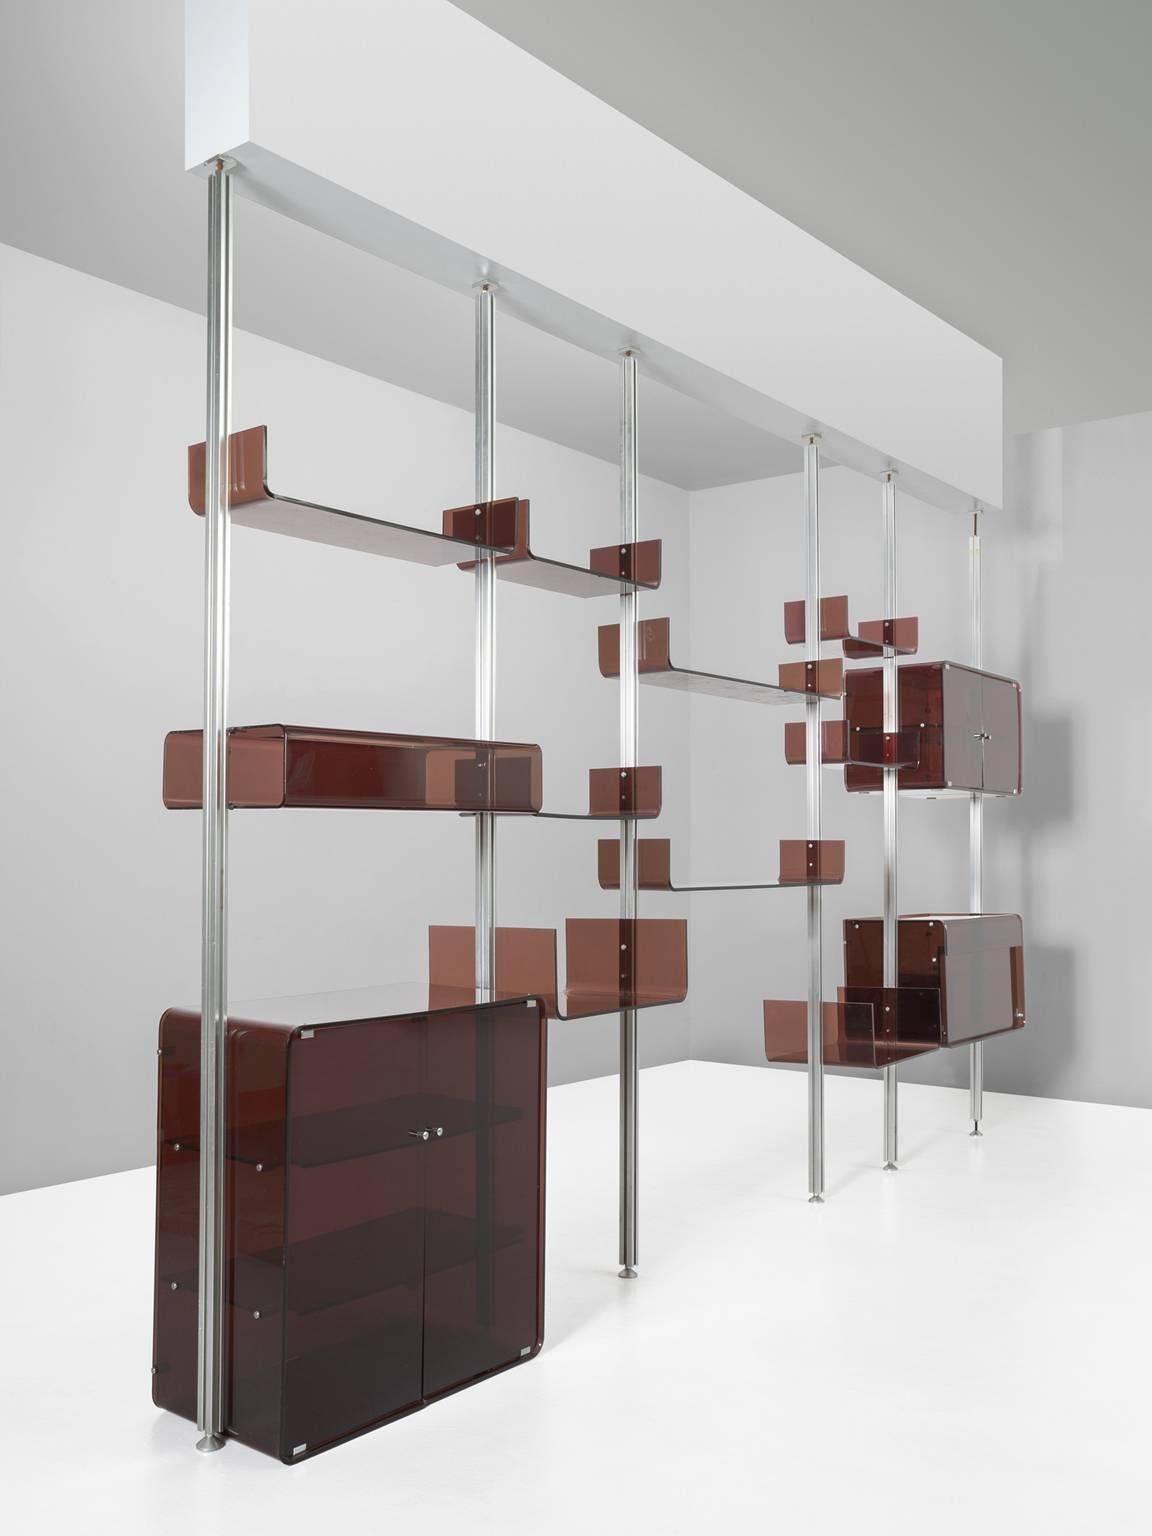 Modular wall system, in acrylic and aluminum by Michel Ducaroy for Roche Bobois, France, 1970s.

Free standing shelves by French manufacturer Roche Bobois. This bookcase consists of five vertical compartments, which can be arranged to your own